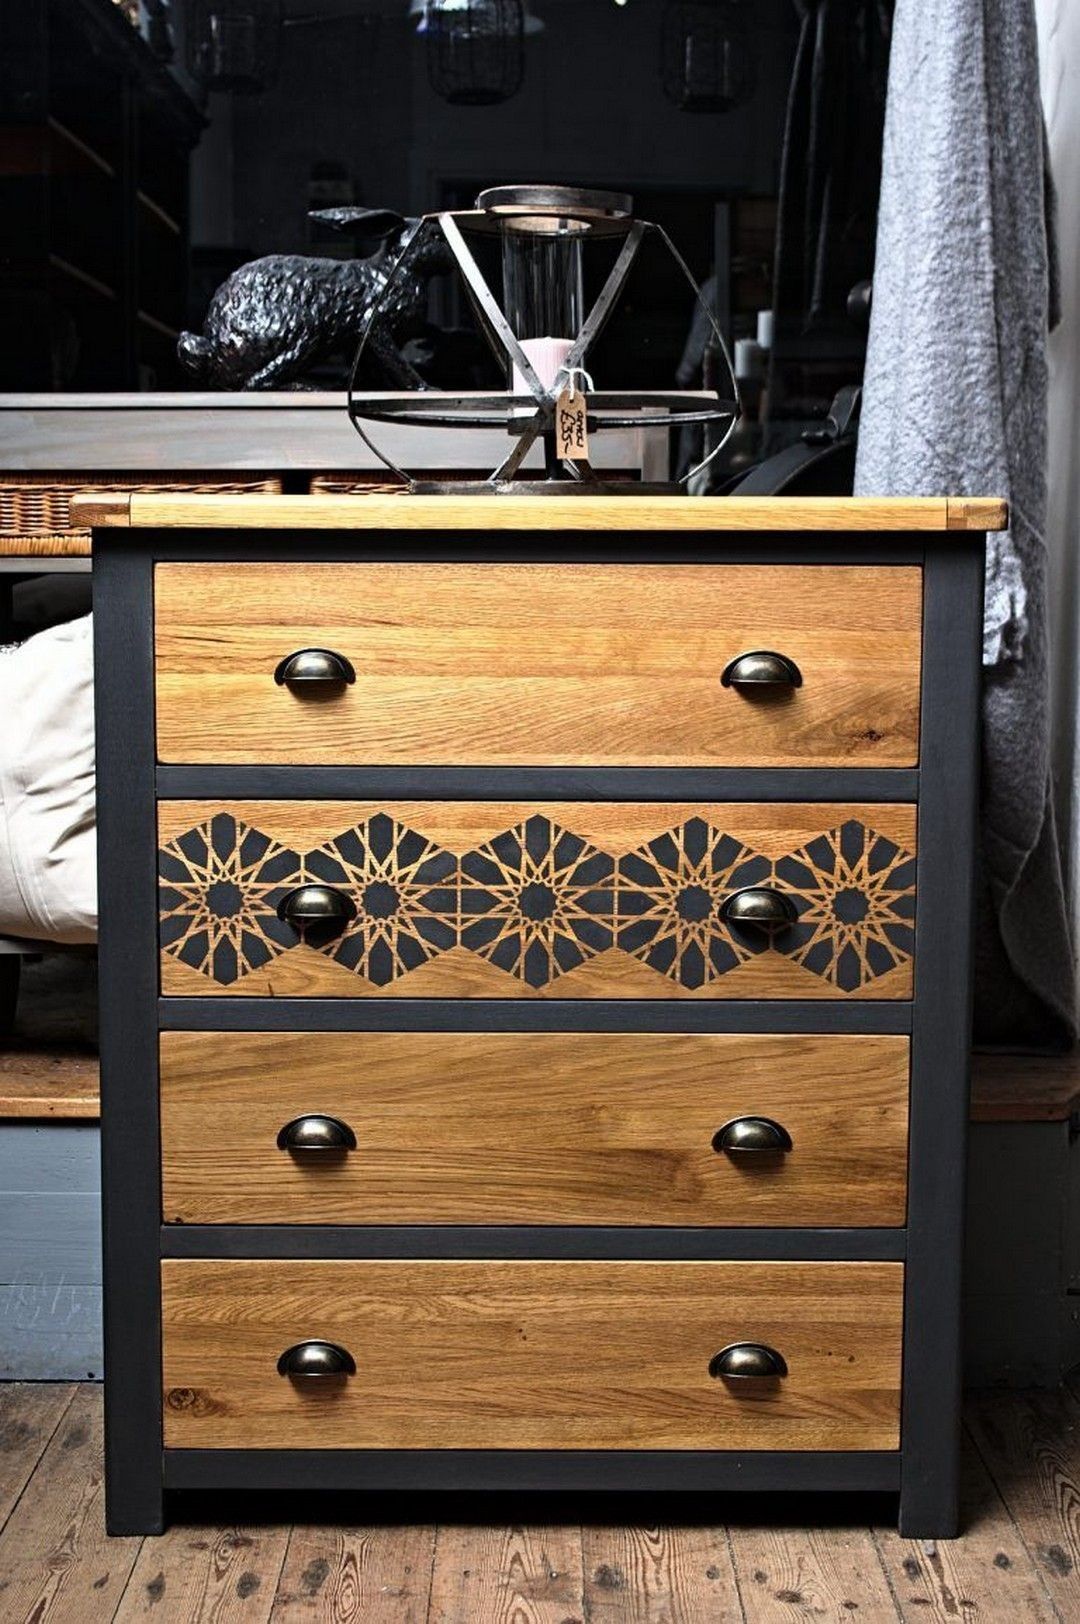 Upcycled Furniture: Unique Pieces For A Personalized Home